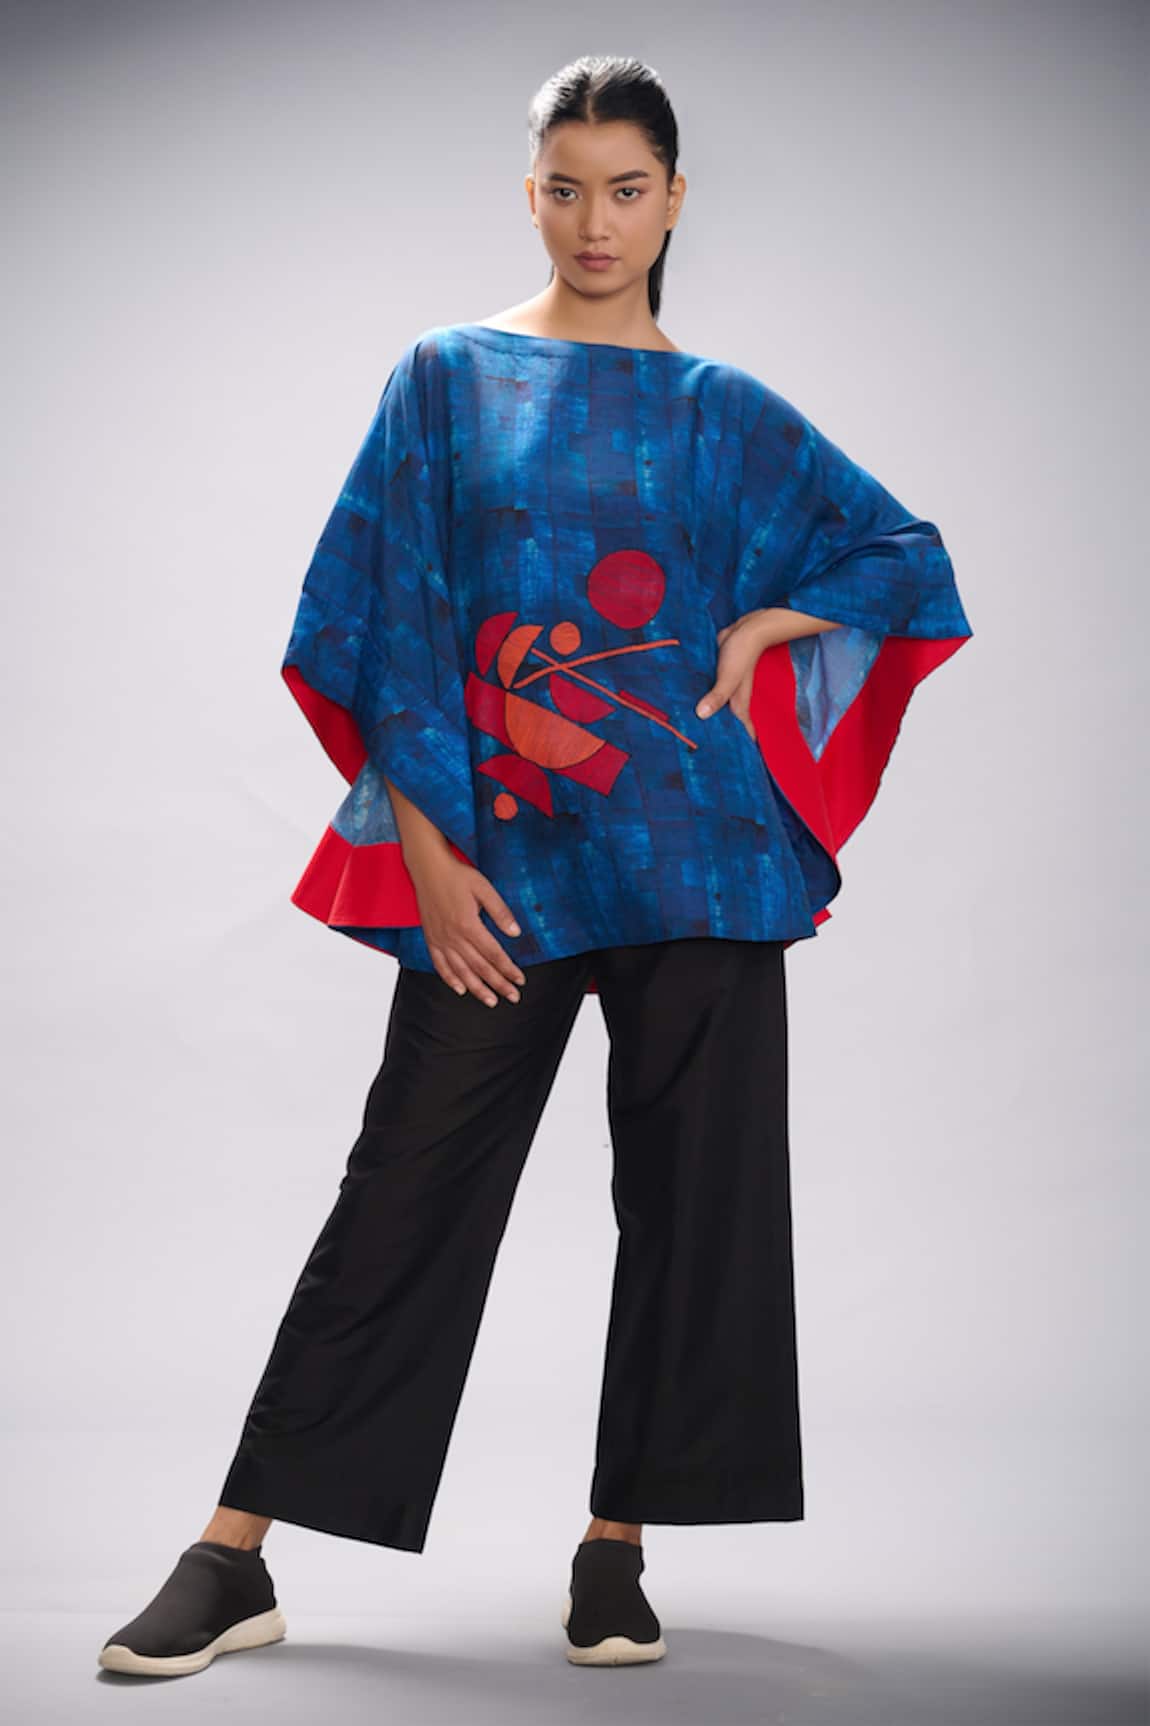 Taika by Poonam Bhagat Printed & Embroidered Poncho